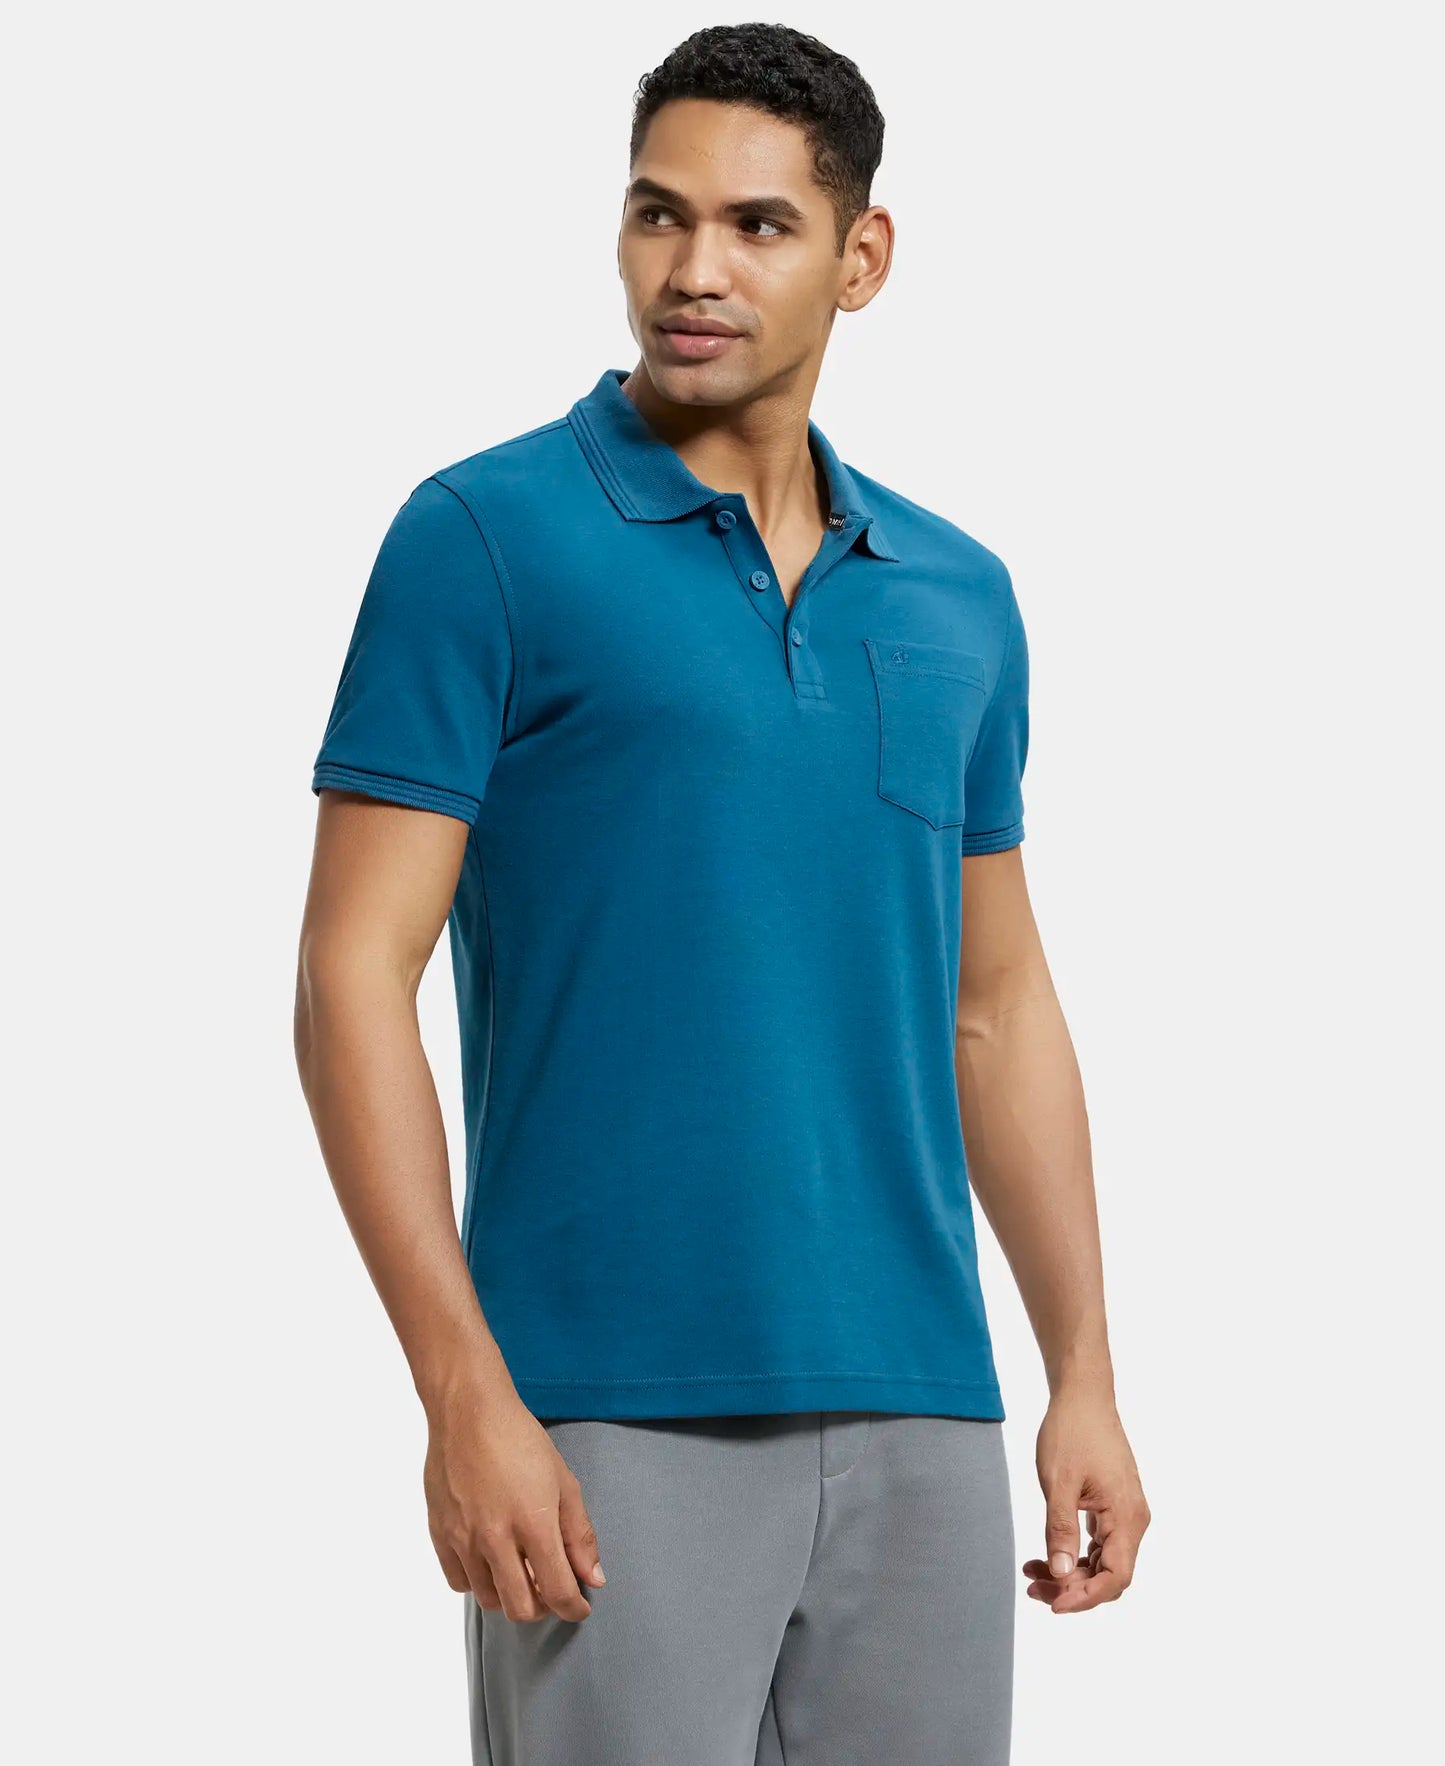 Super Combed Cotton Rich Solid Half Sleeve Polo T-Shirt with Chest Pocket - Seaport Teal-2